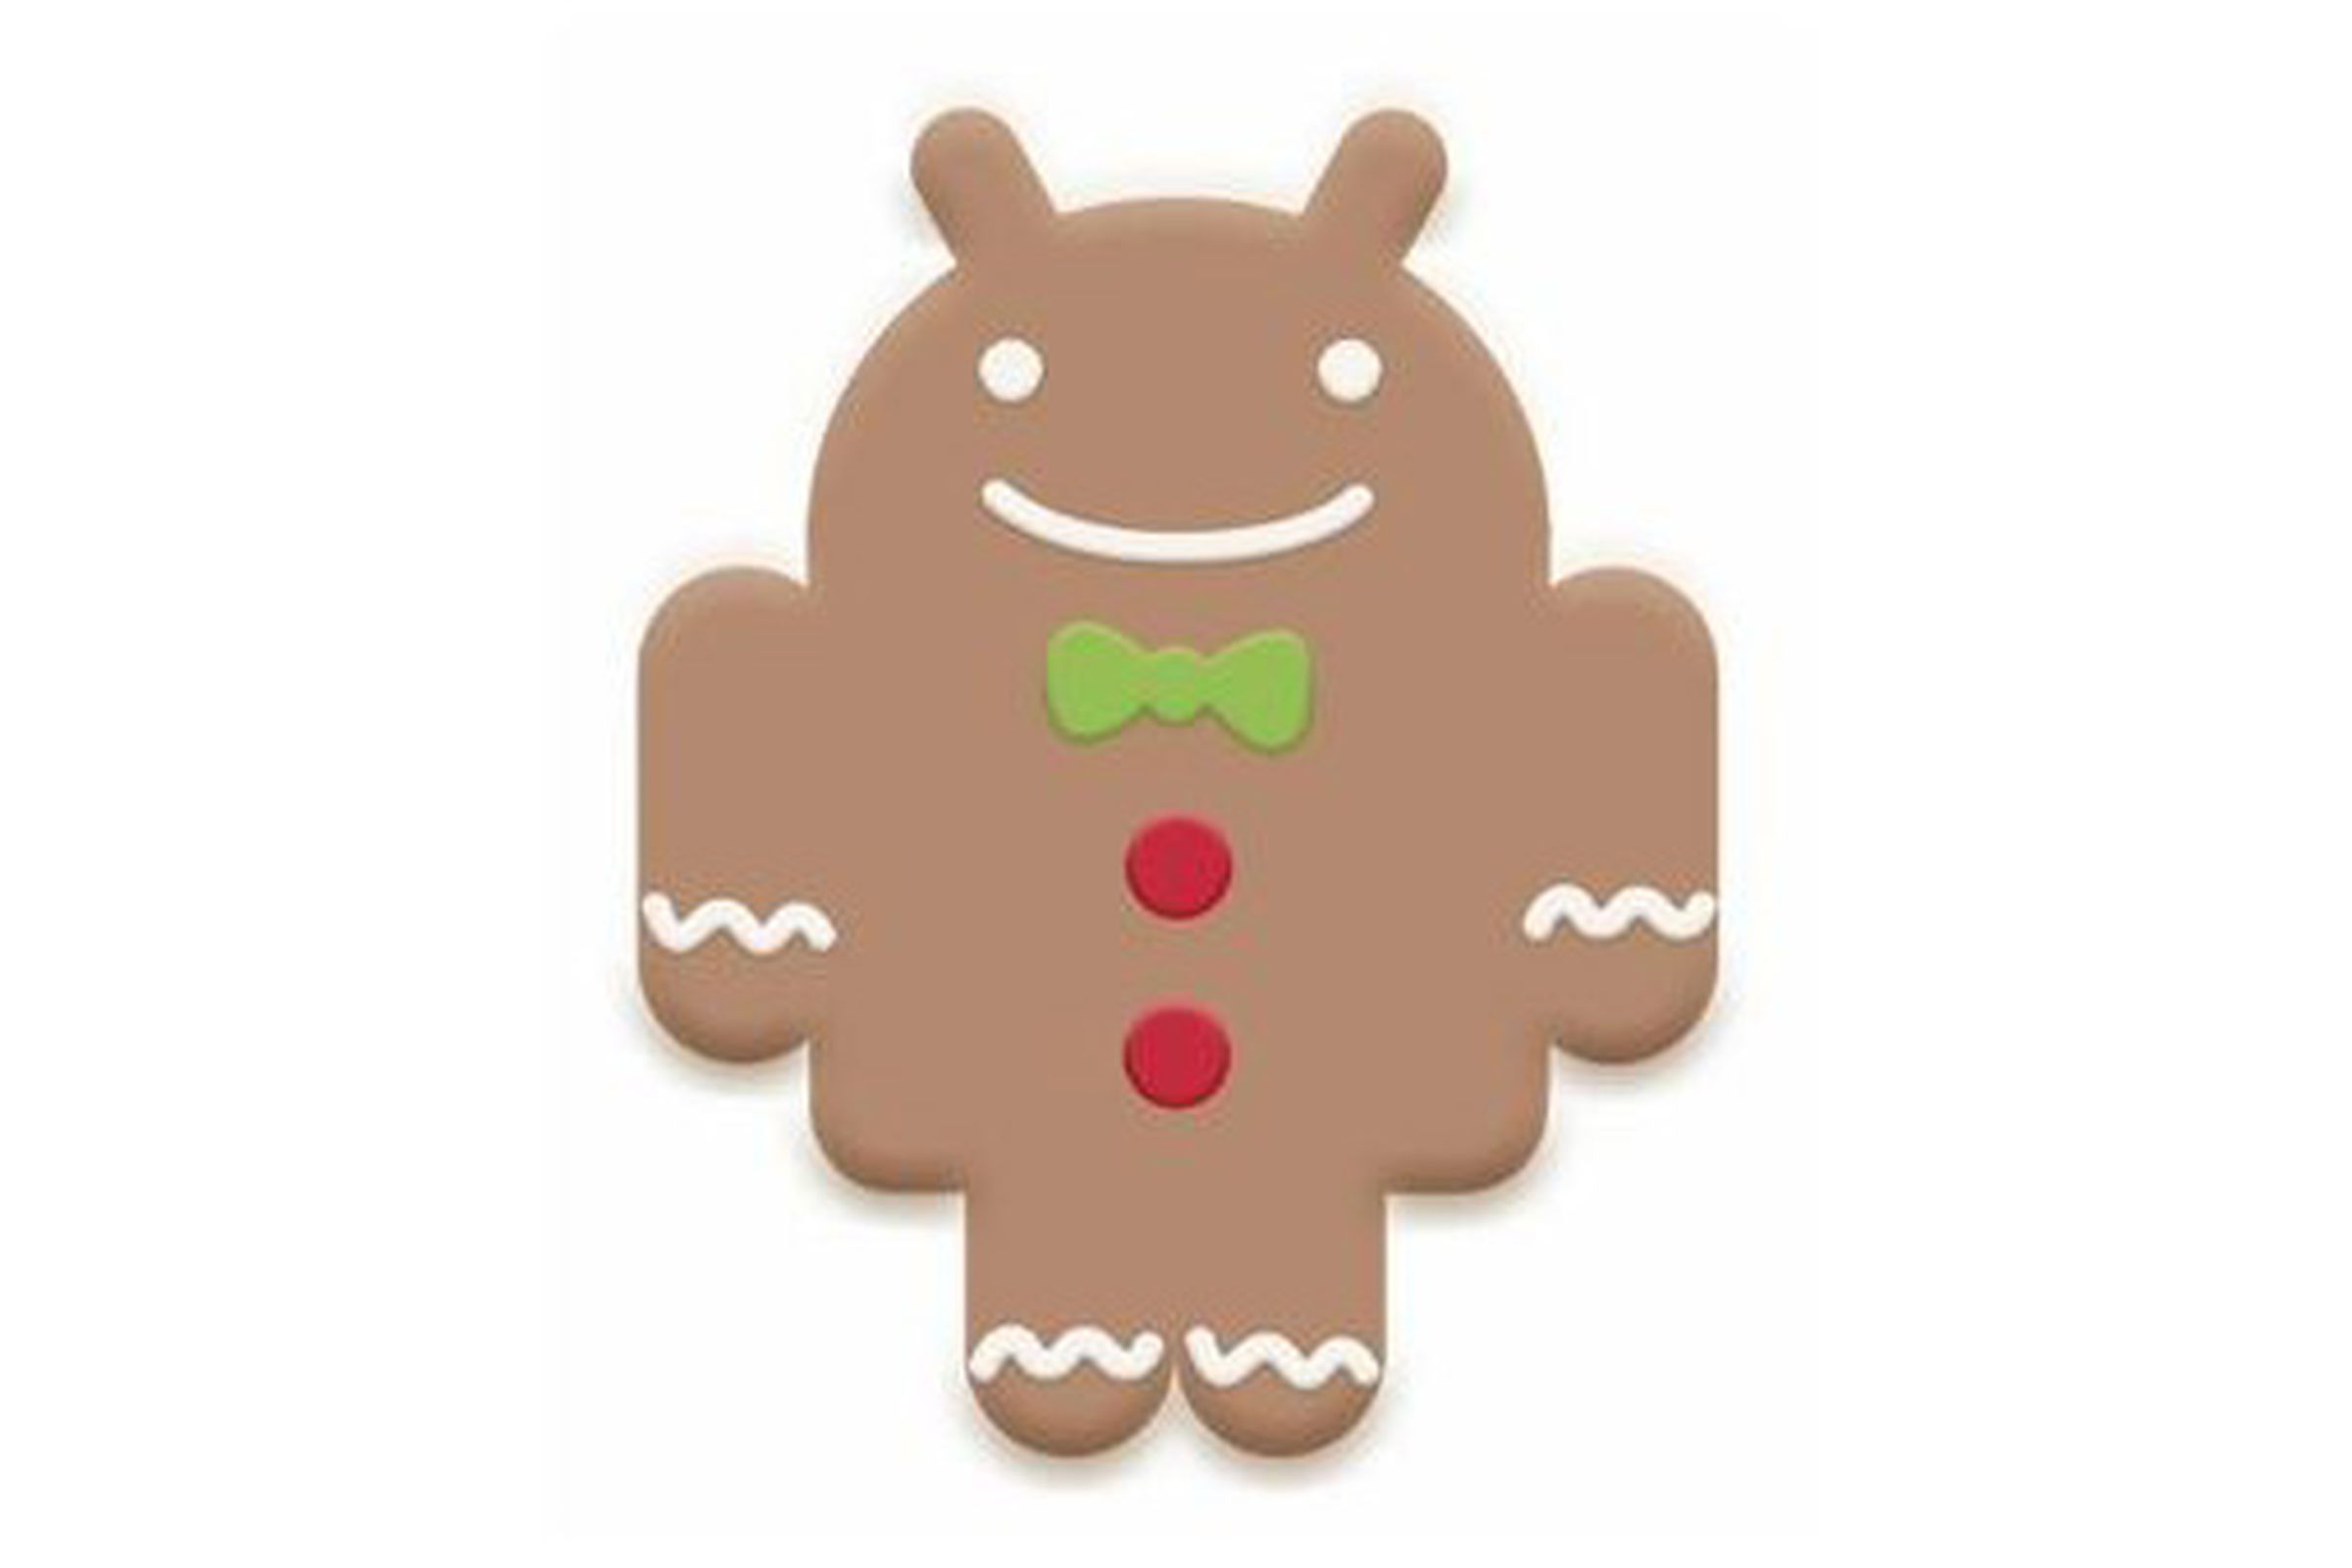 Android Gingerbread Logo